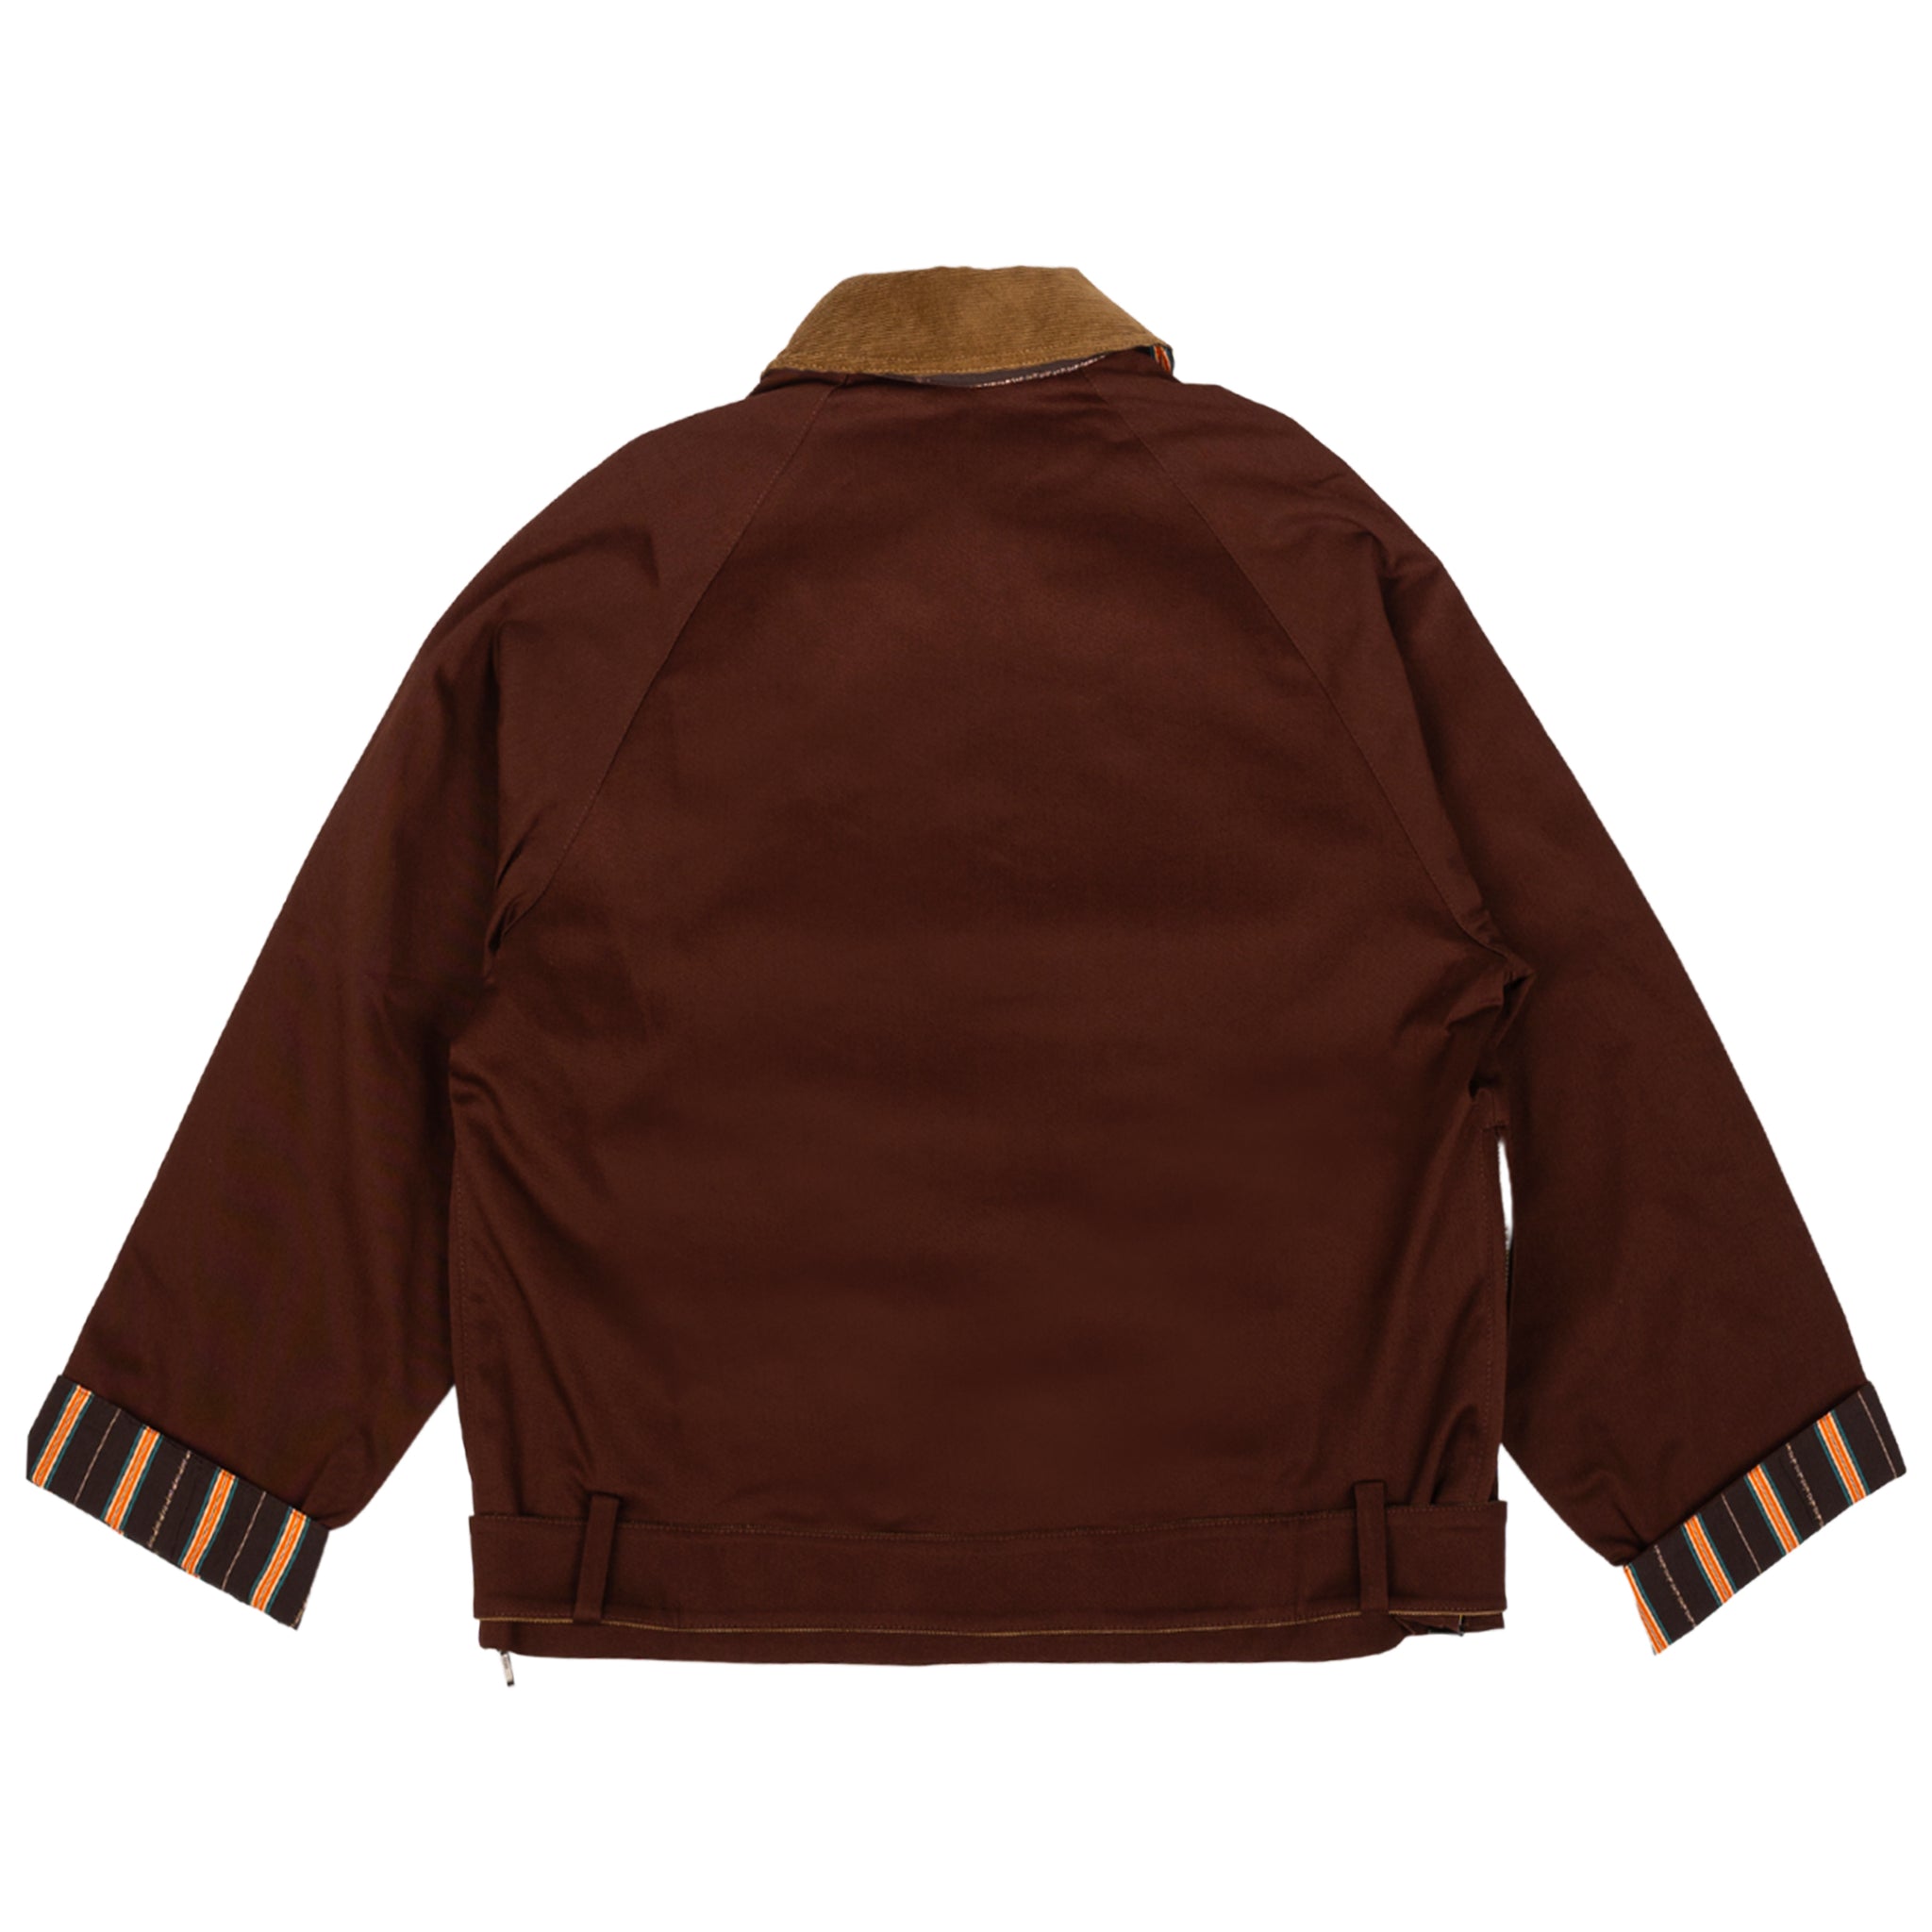 Musy Corduroy Trimmed Jacket in cotton